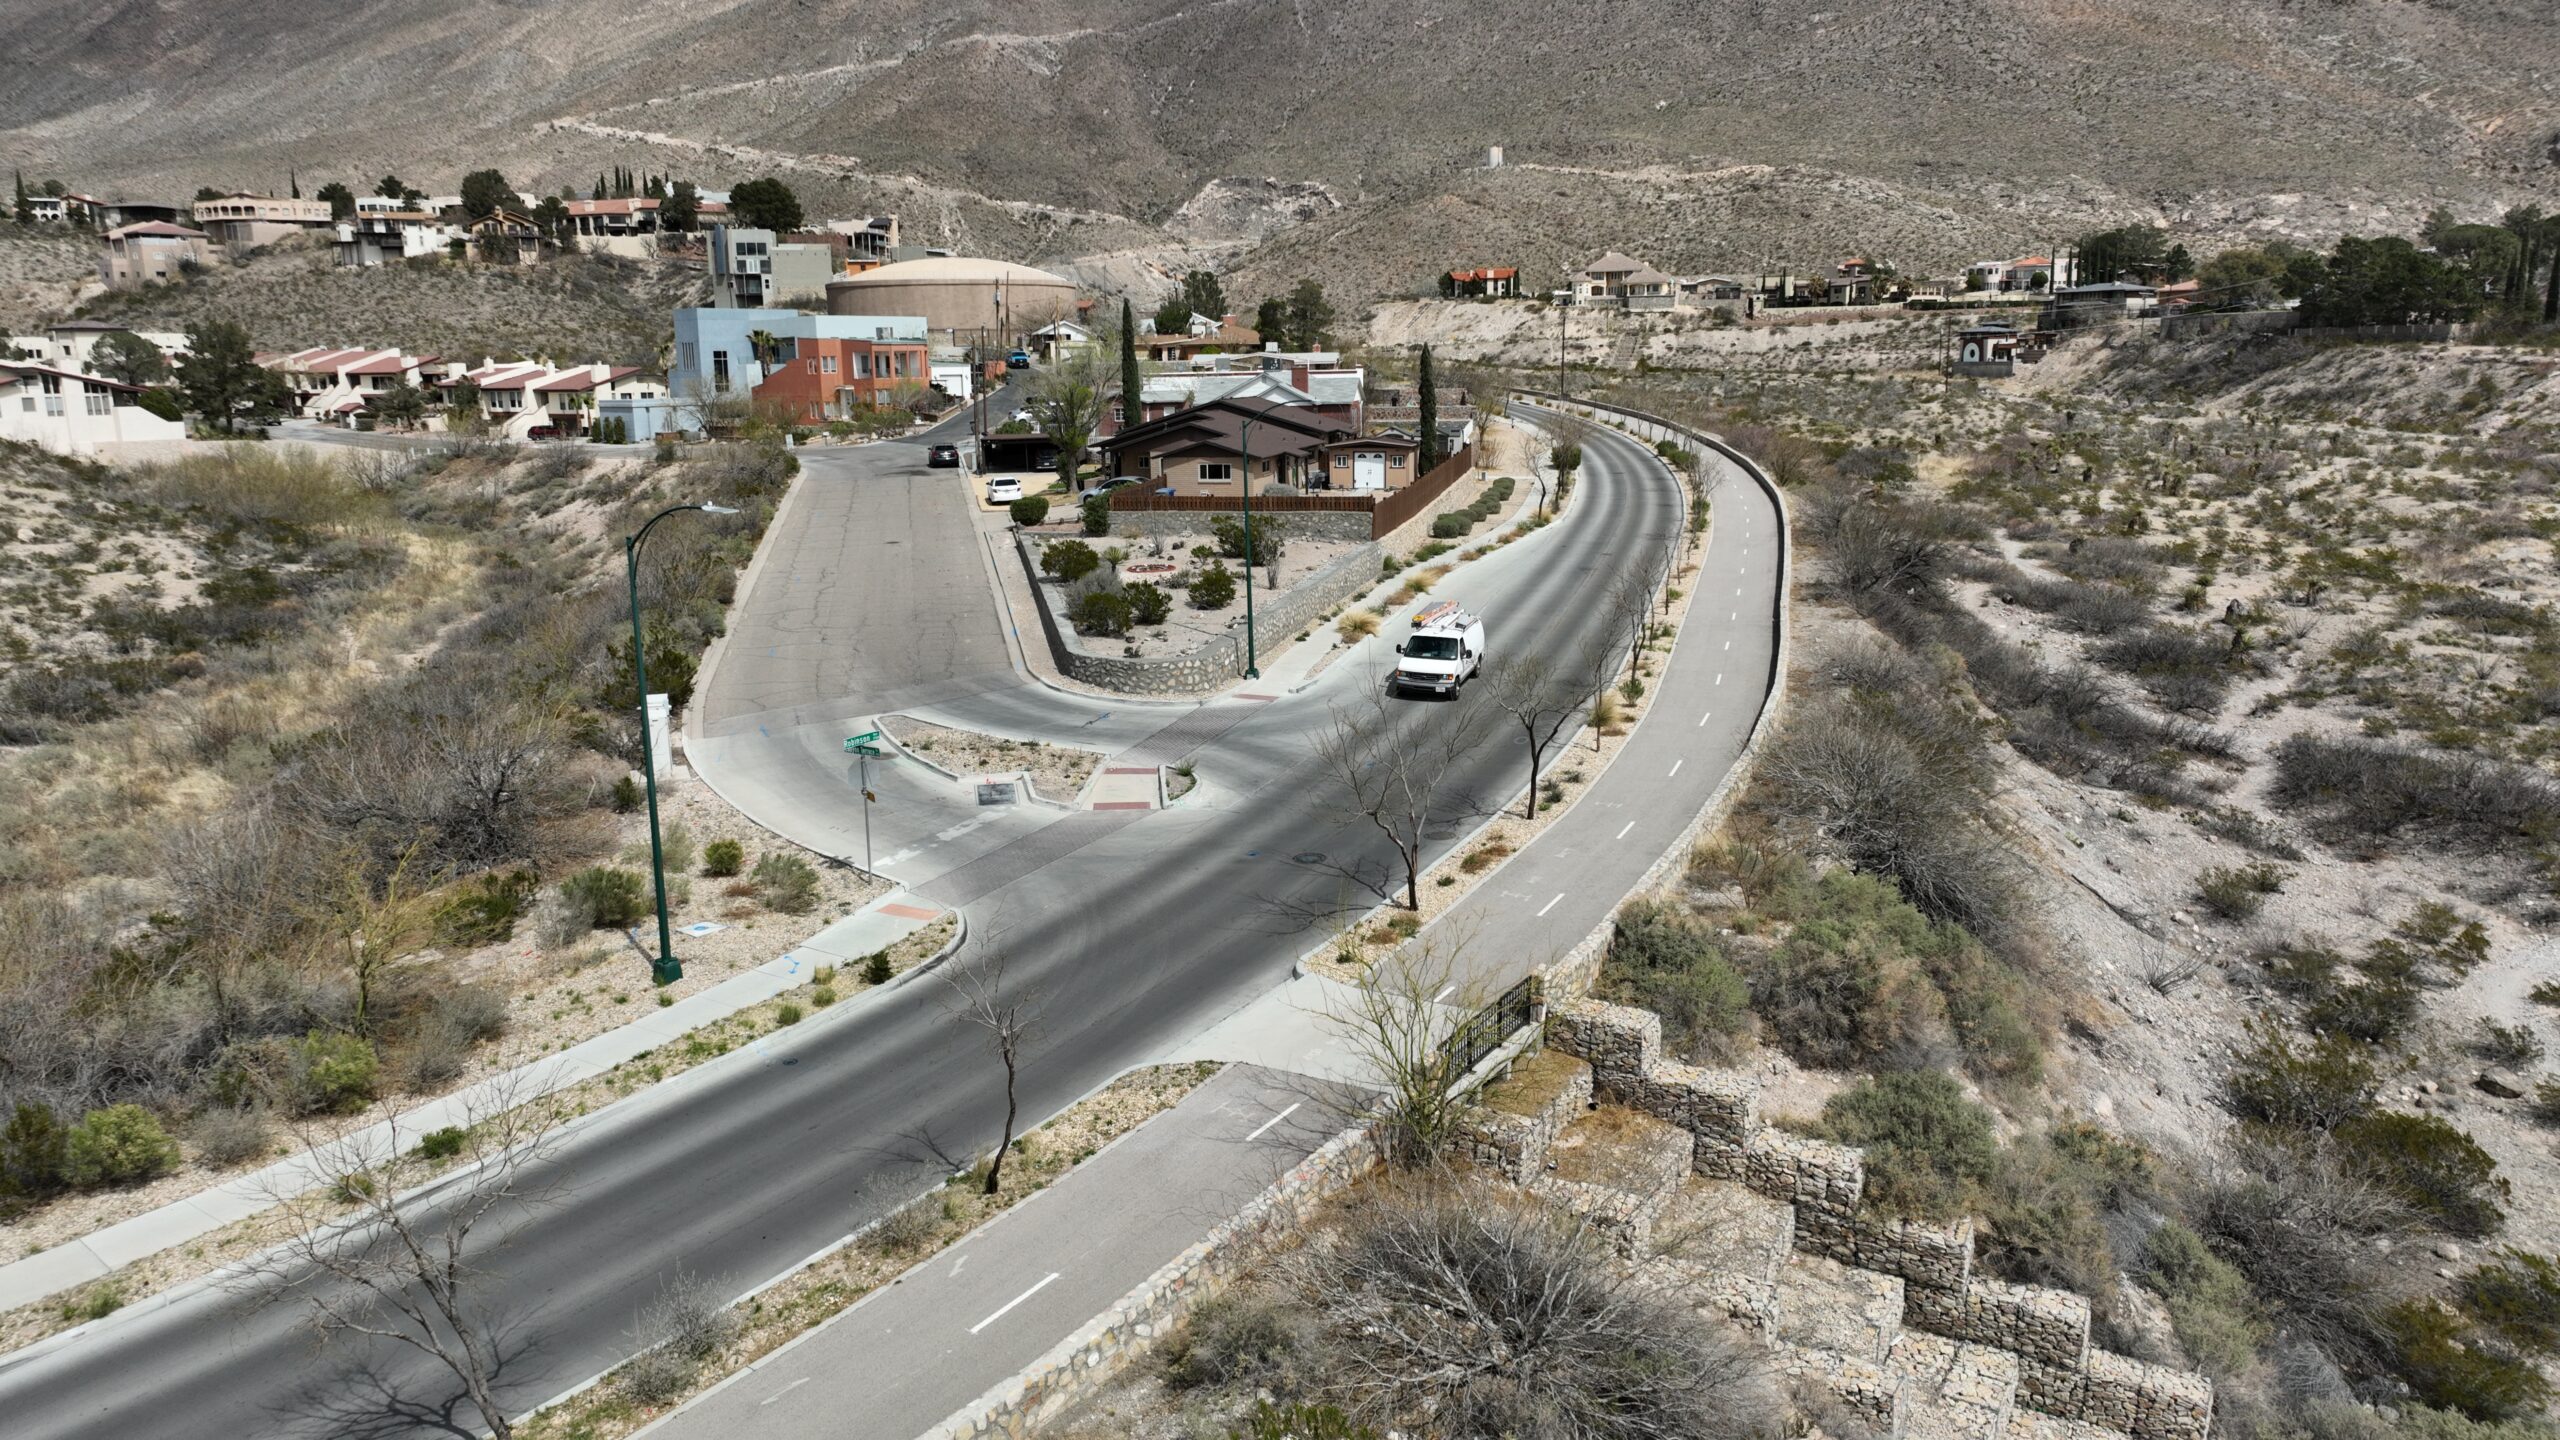 An elevated view of a two-lane shared-use path next to a two lane road with mountains in the background